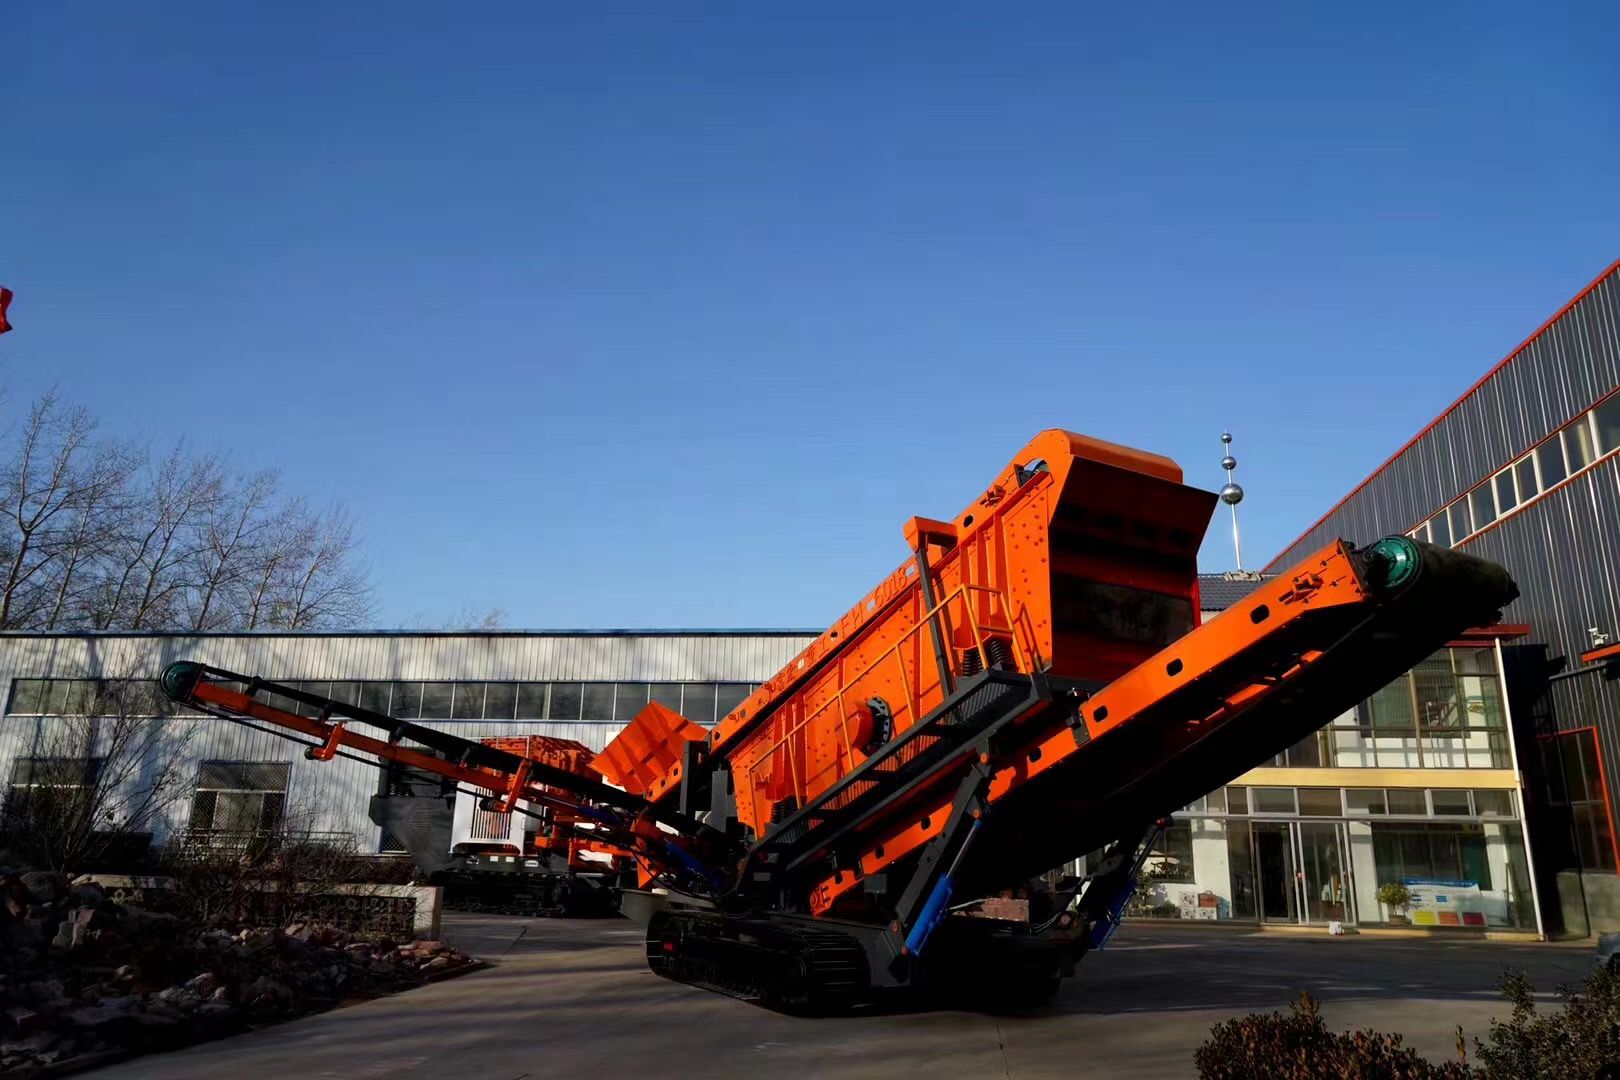 Mobile crusher zitsulo track undercarriage